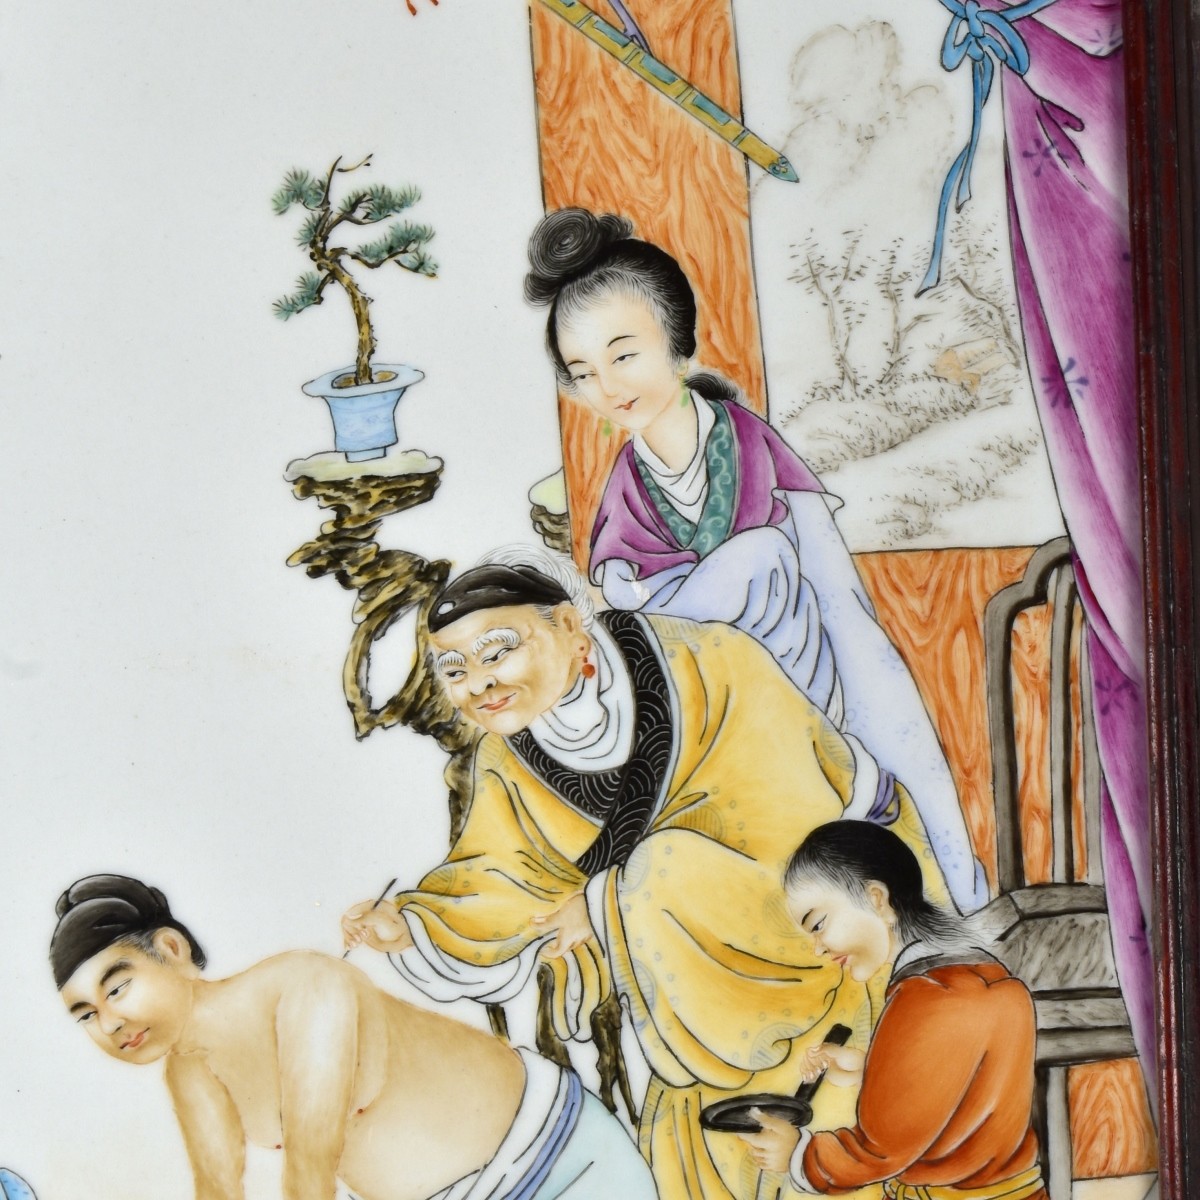 Large Chinese Porcelain Plaque